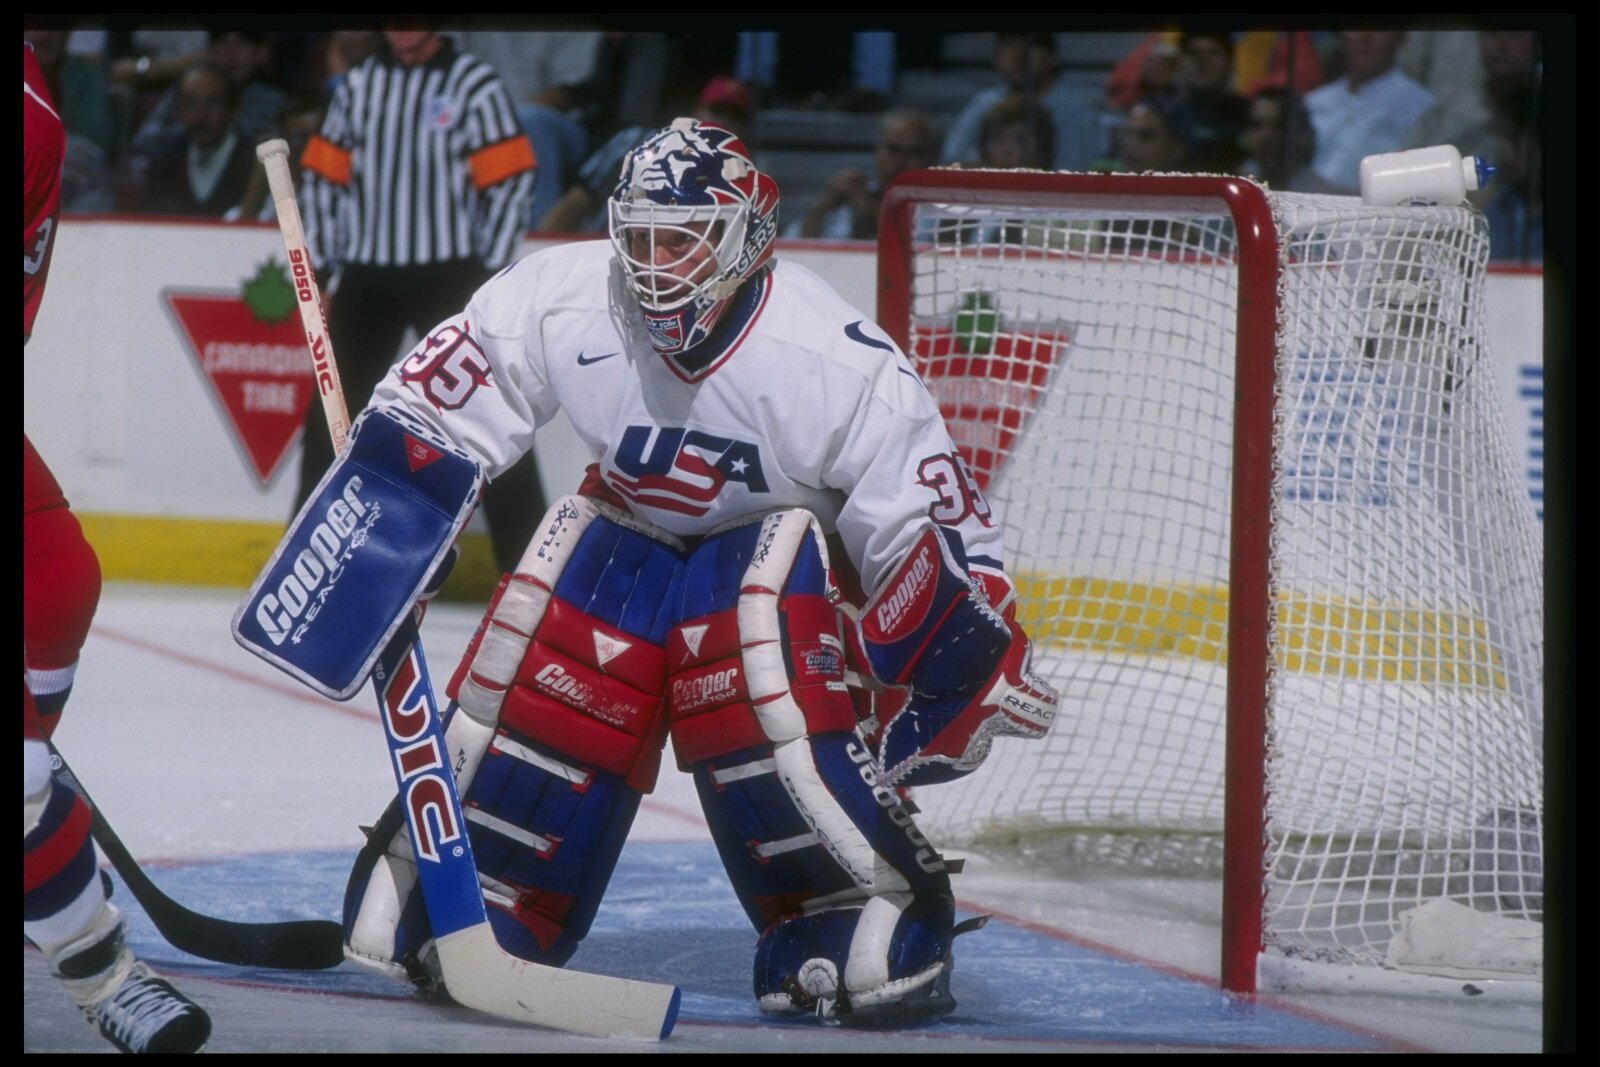 Team USA Claims First Place in the 1996 World Cup of Hockey